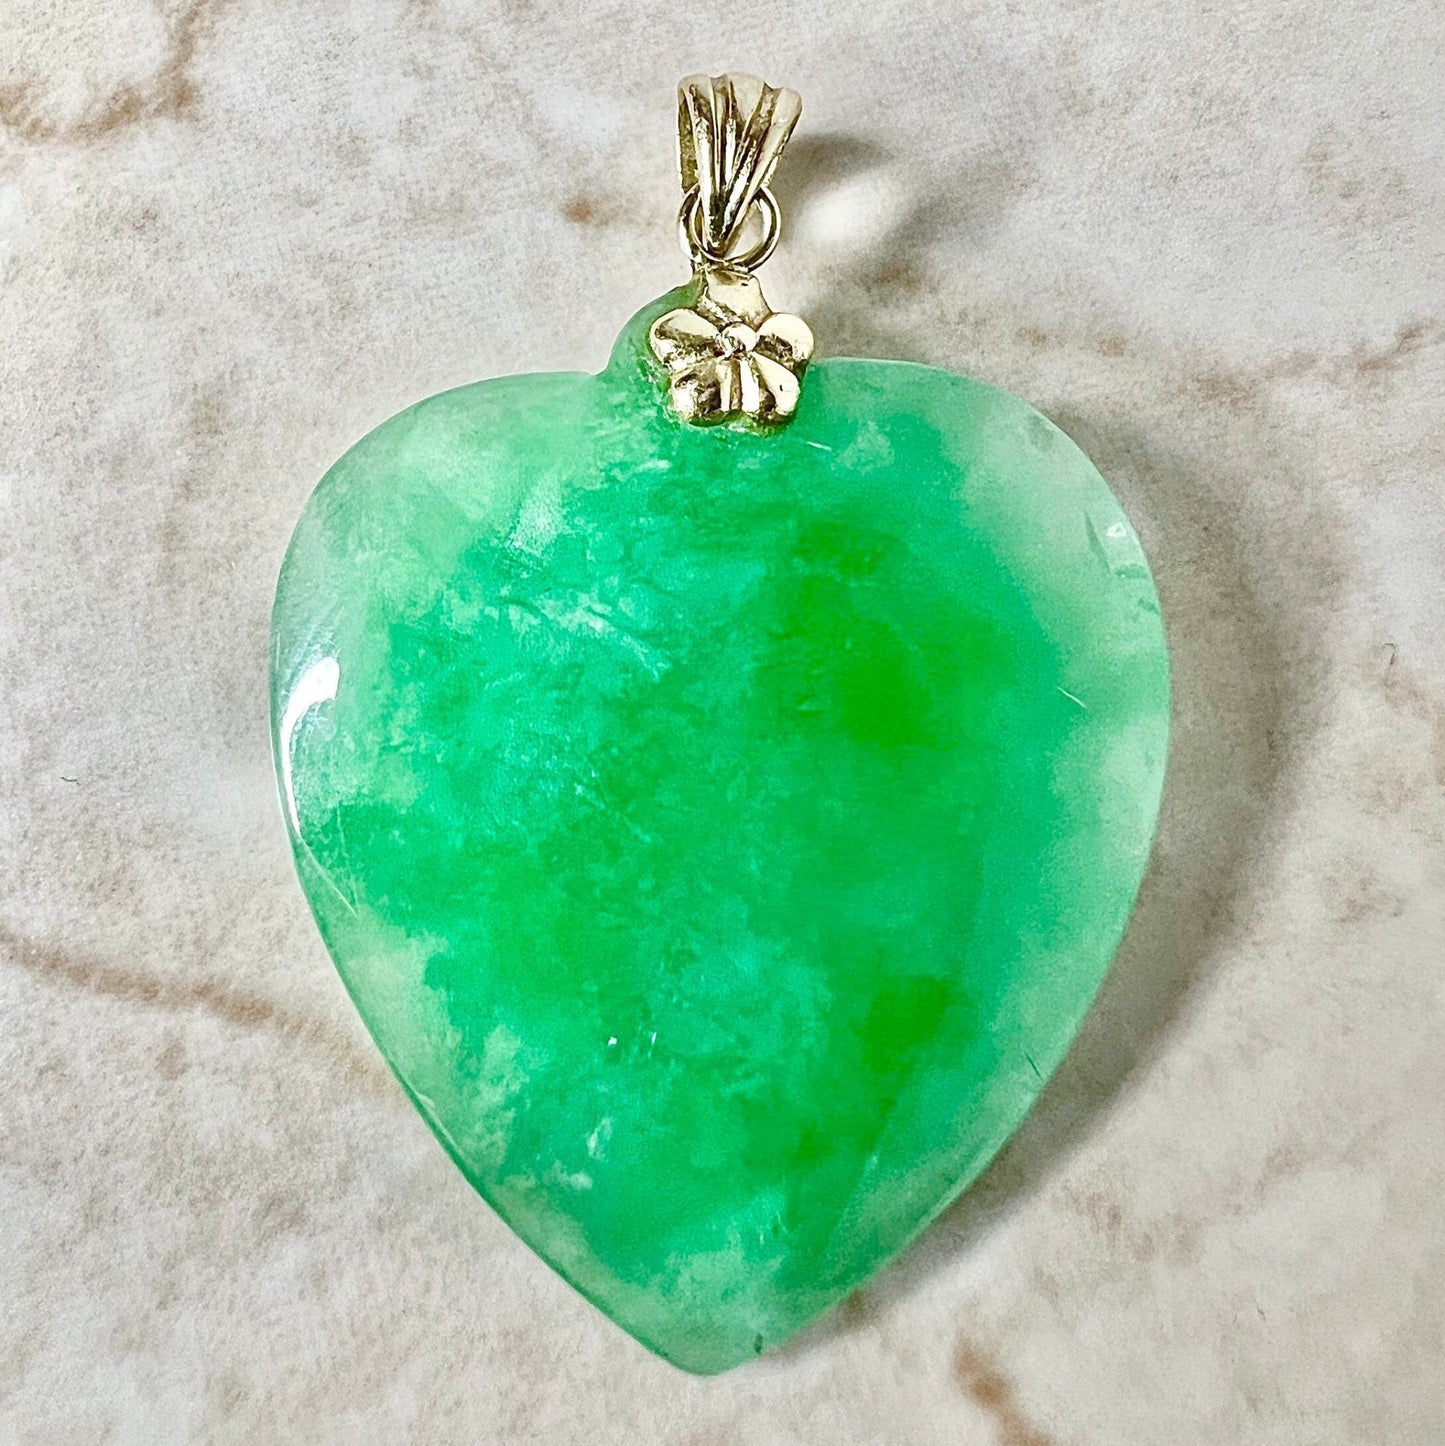 Vintage 14K Green Jadeite Jade Heart Pendant Necklace - Yellow Gold Jadeite Pendant - Chinese Jewelry - Valentine’s Day Gift For Her